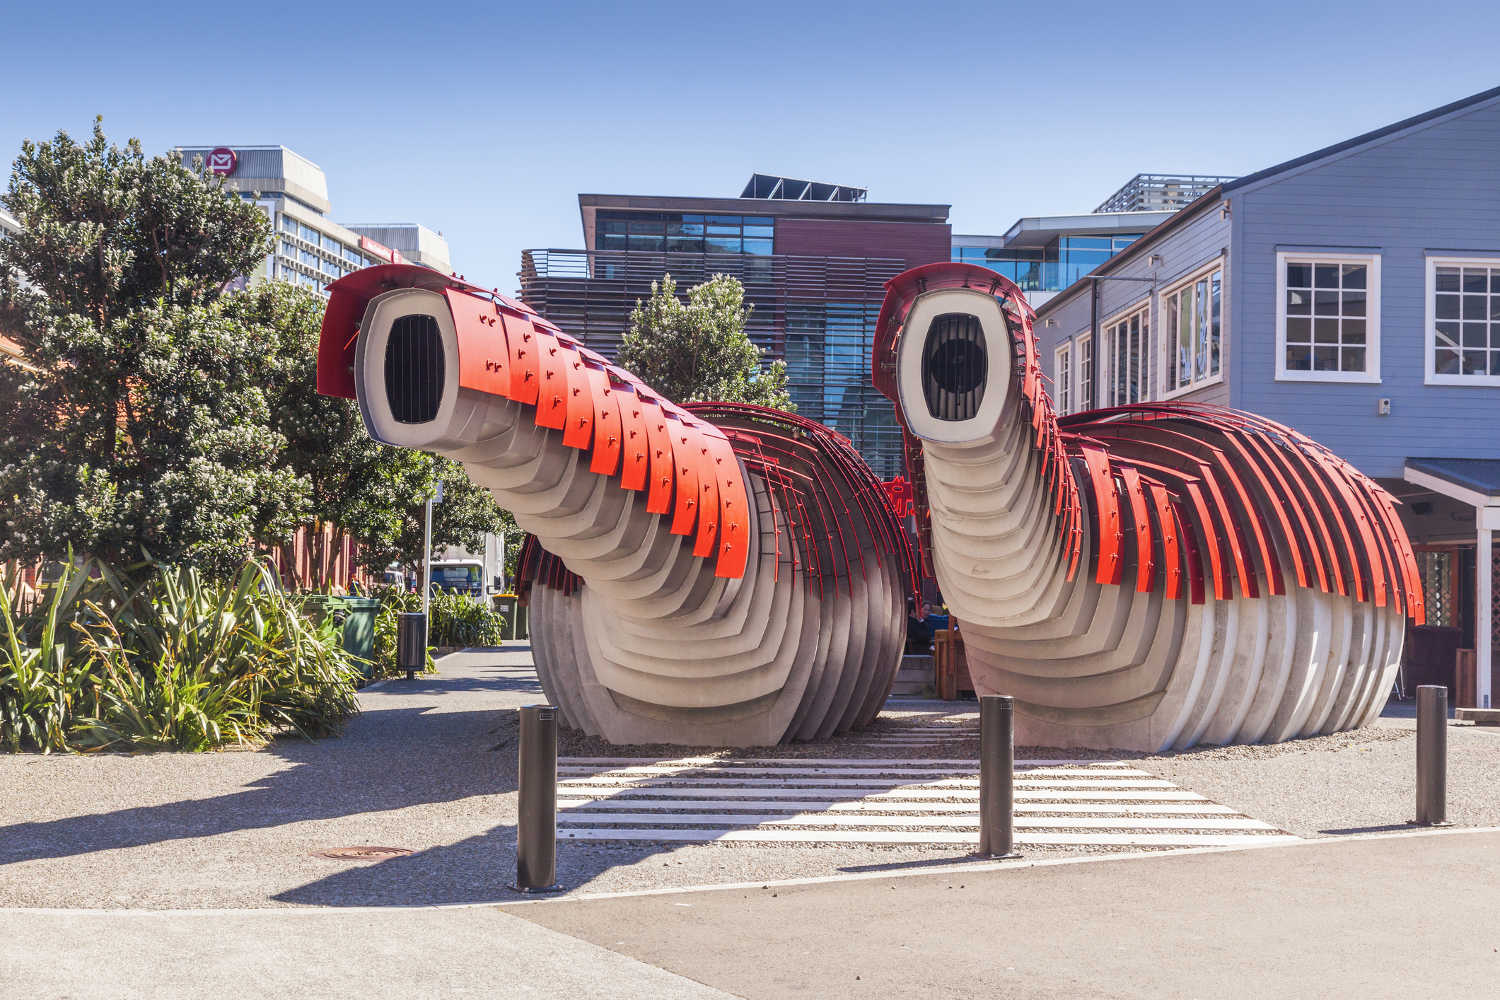 Lobster Toilets in the Kumutoto public space on Queen`s Wharf, Wellington Waterfront, New Zealand